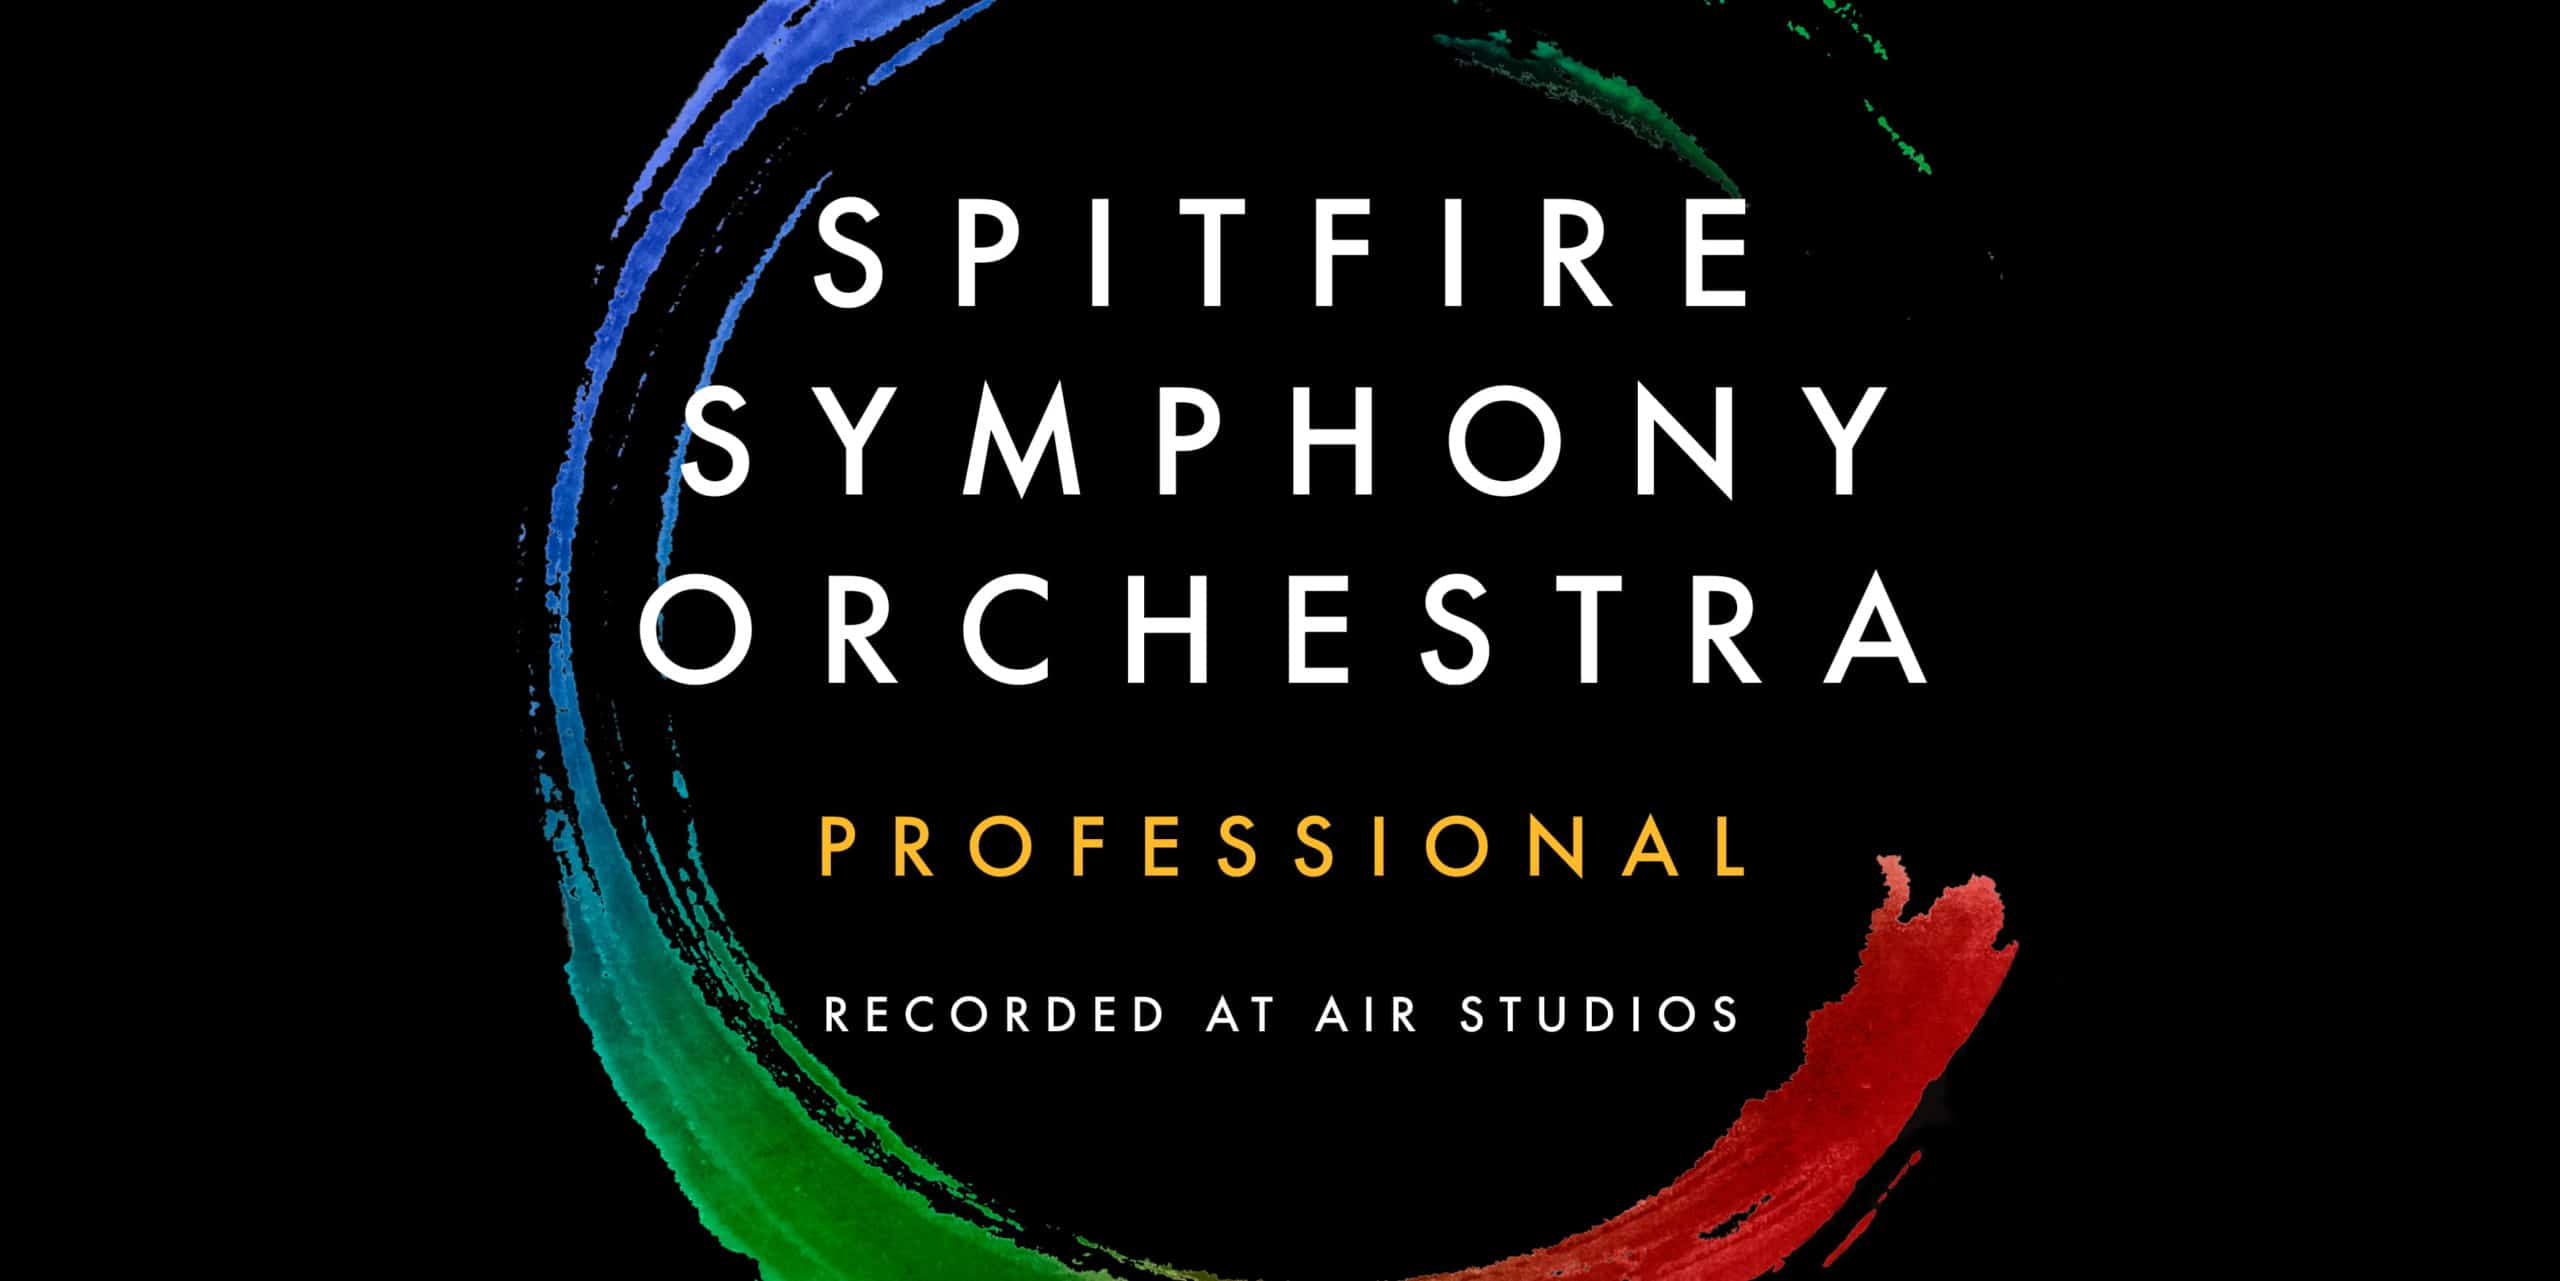 Spitfire Audio completes blockbuster symphonic anthology as SPITFIRE SYMPHONY ORCHESTRA PROFESSIONAL at AIR Studios spiritual home